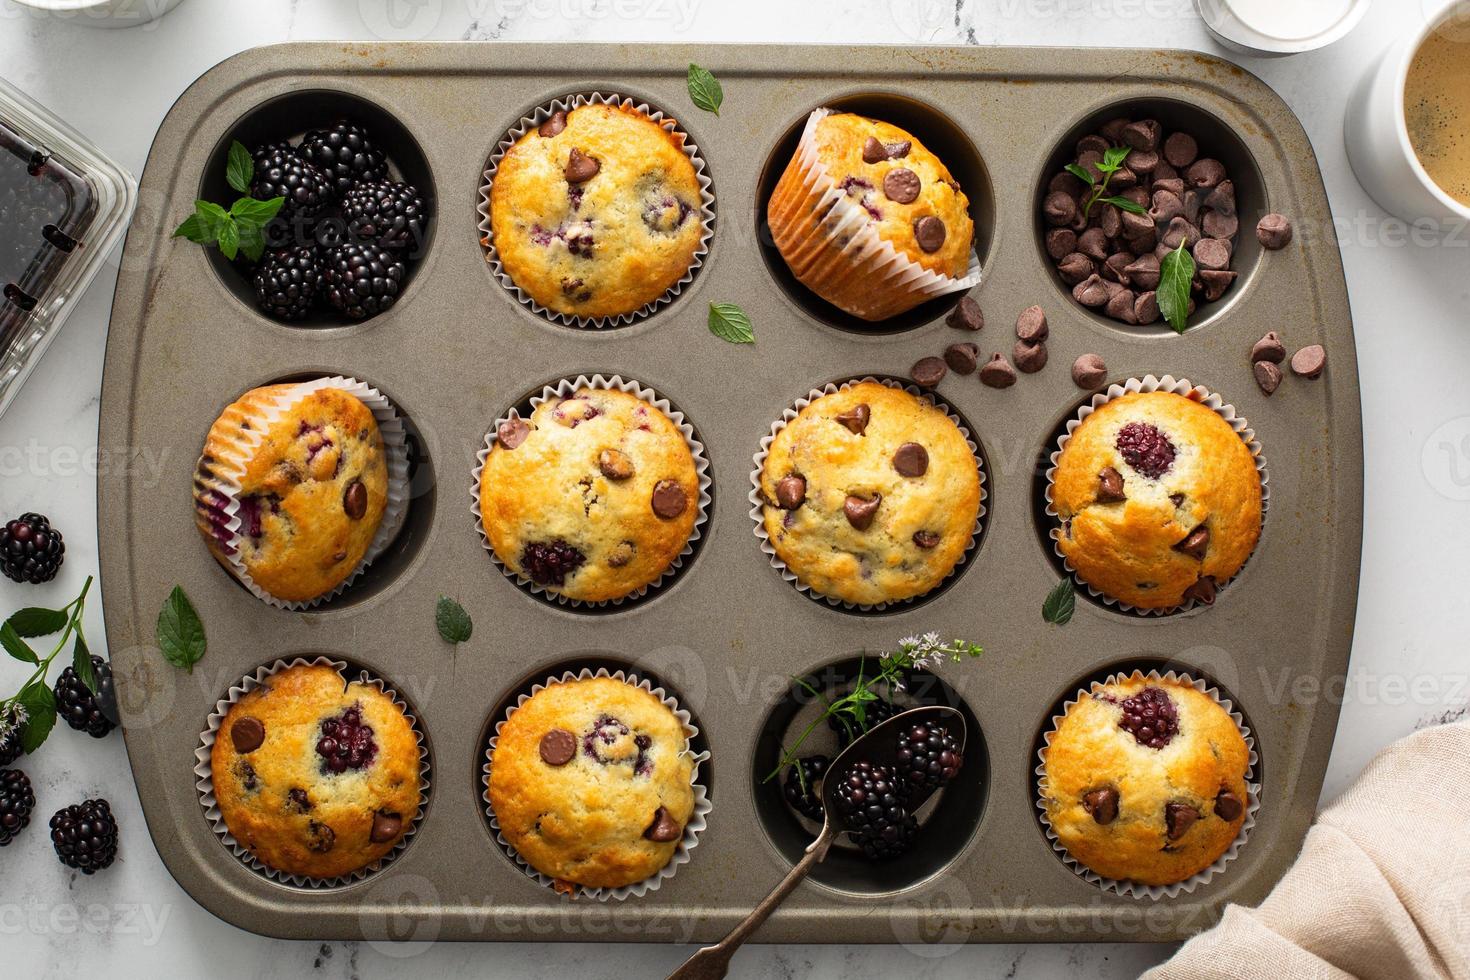 Blackberry and chocolate chip muffins, summer recipe photo